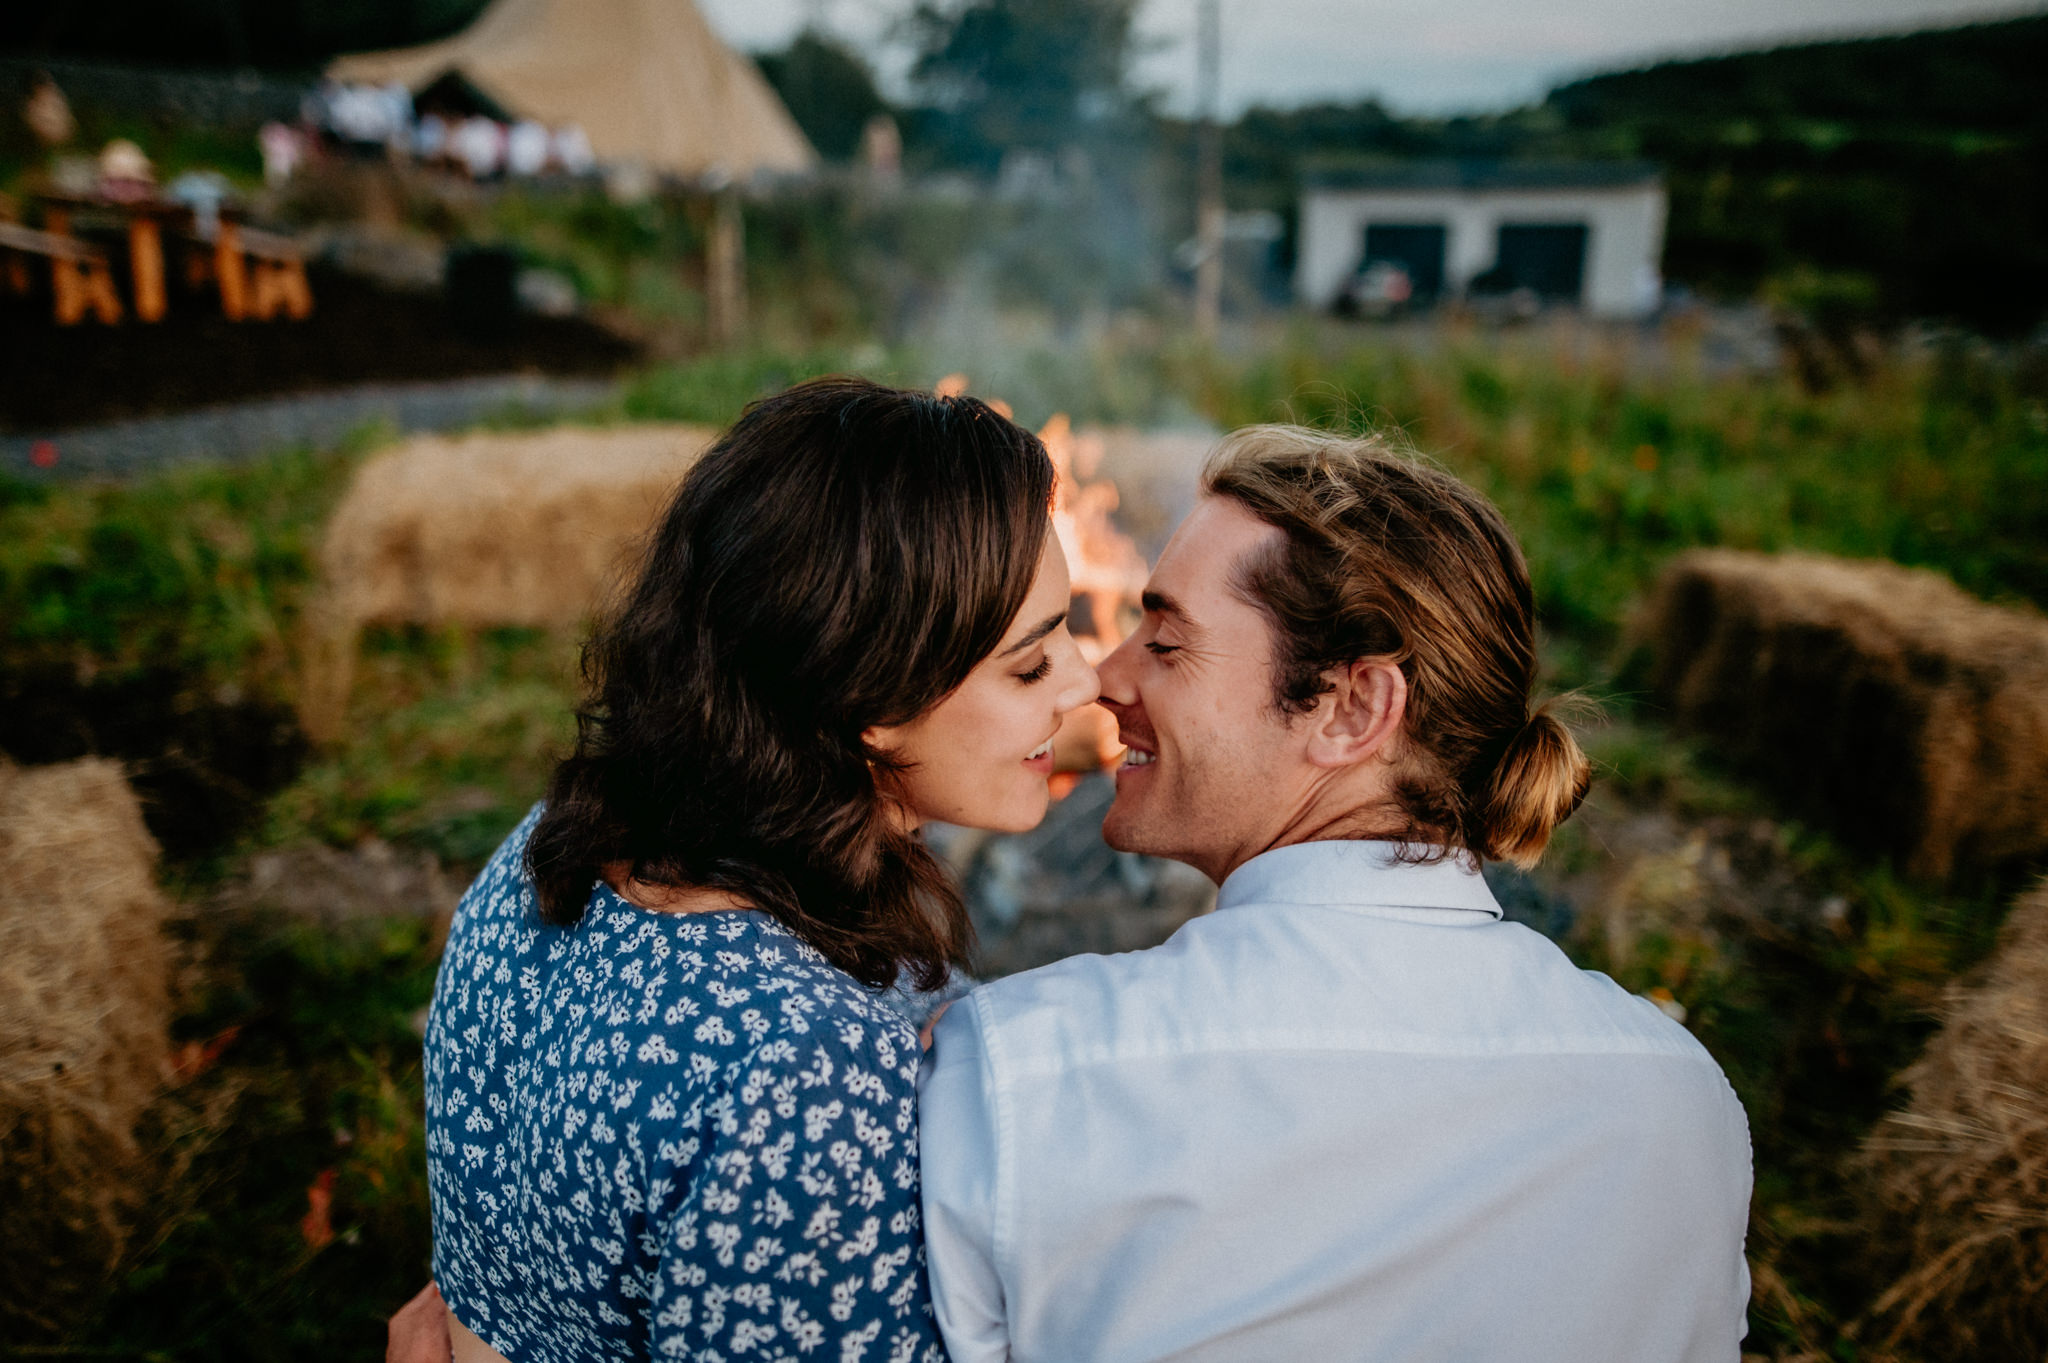 Couple-leaning-for-a-kiss-elopement-kristina-kelly-photography